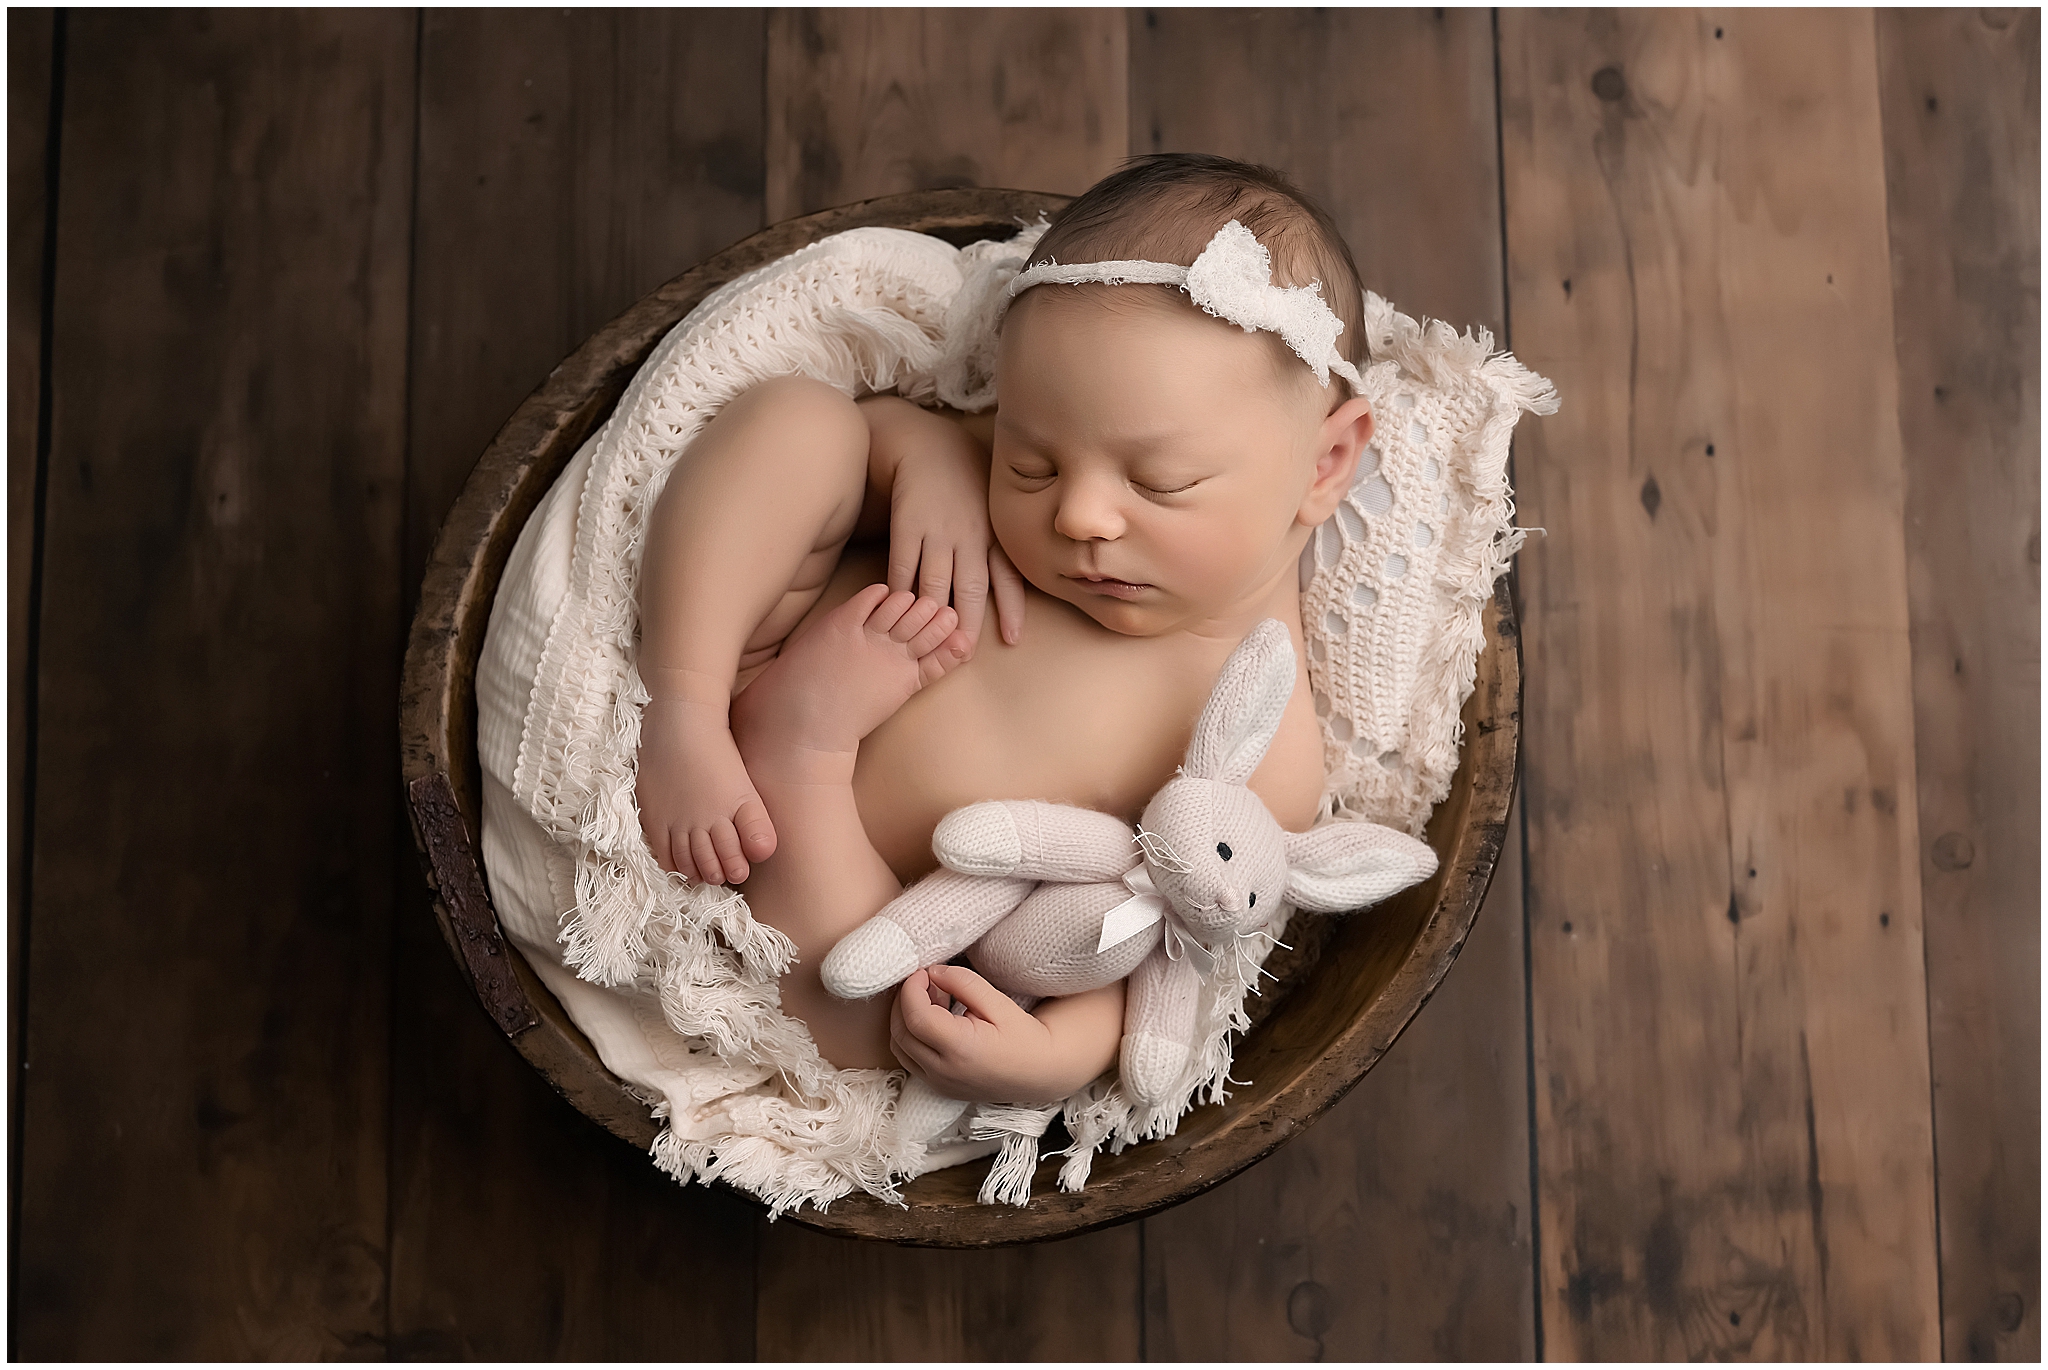 baby girl sleeping in bowl during newborn photography session at professional studio in london ontario